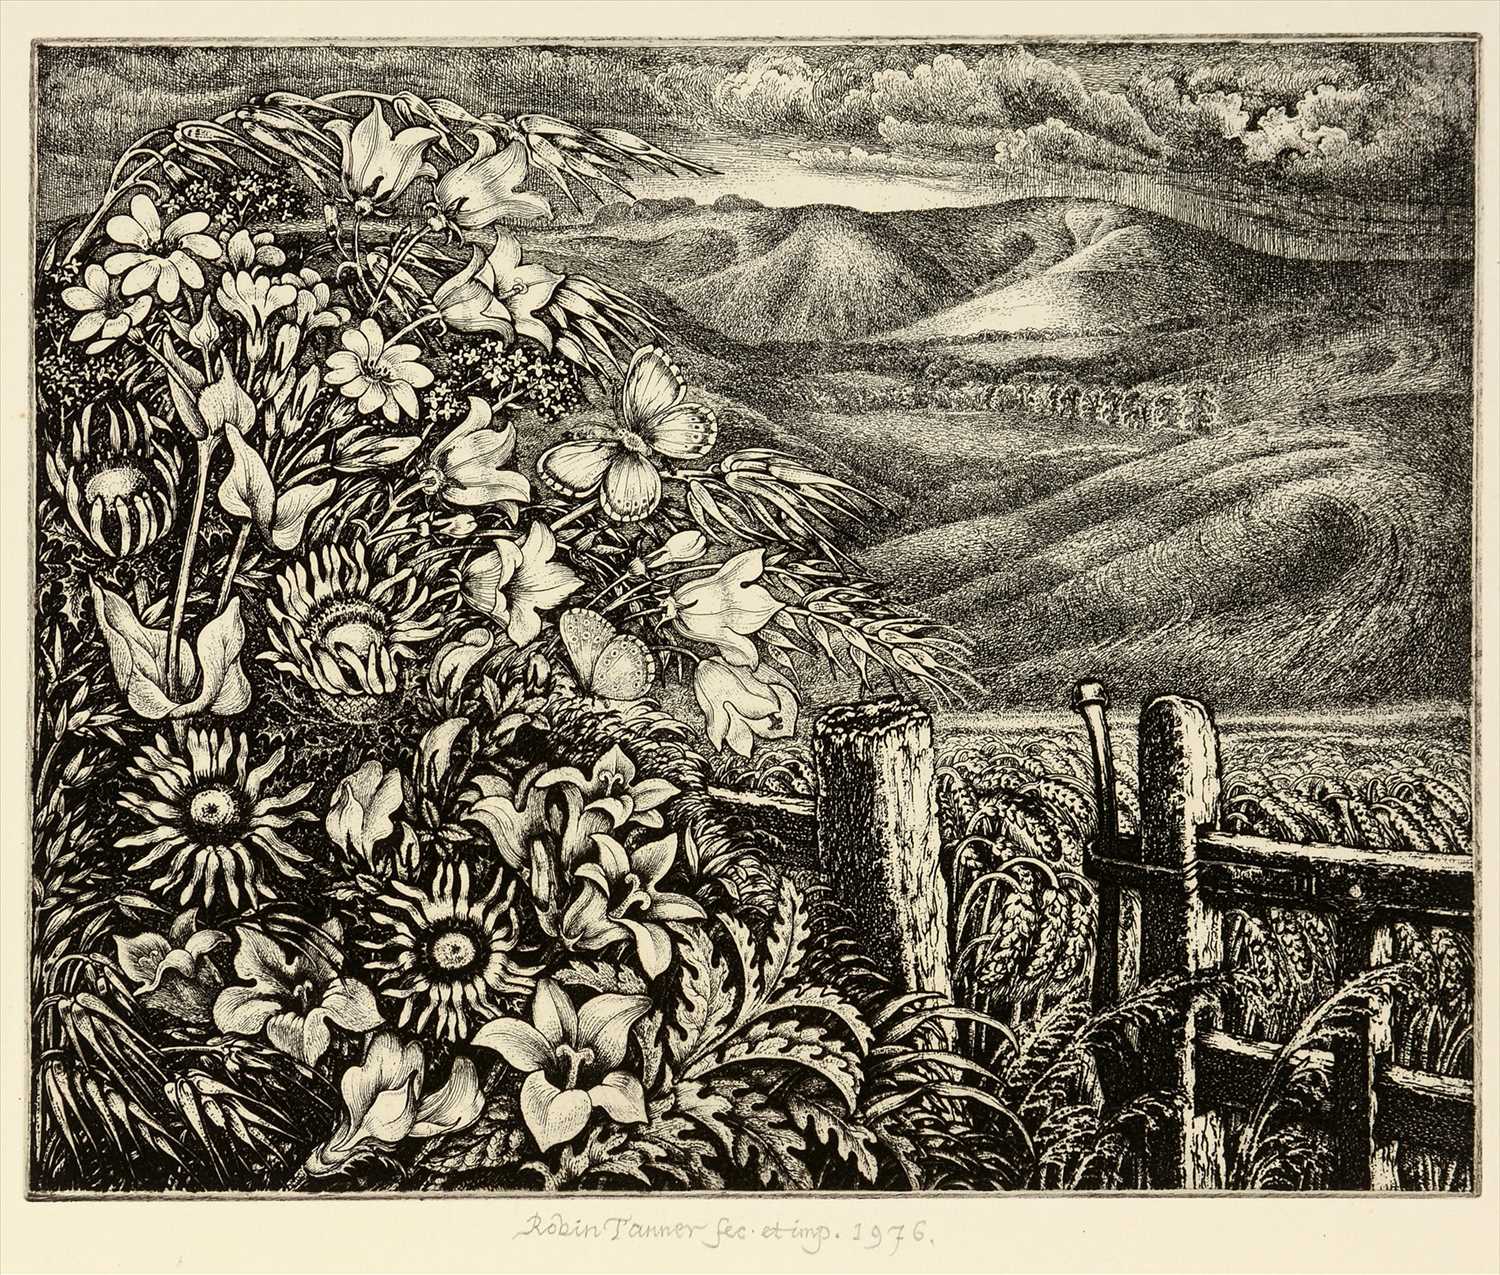 Lot 1030 - Robin Tanner - etching.